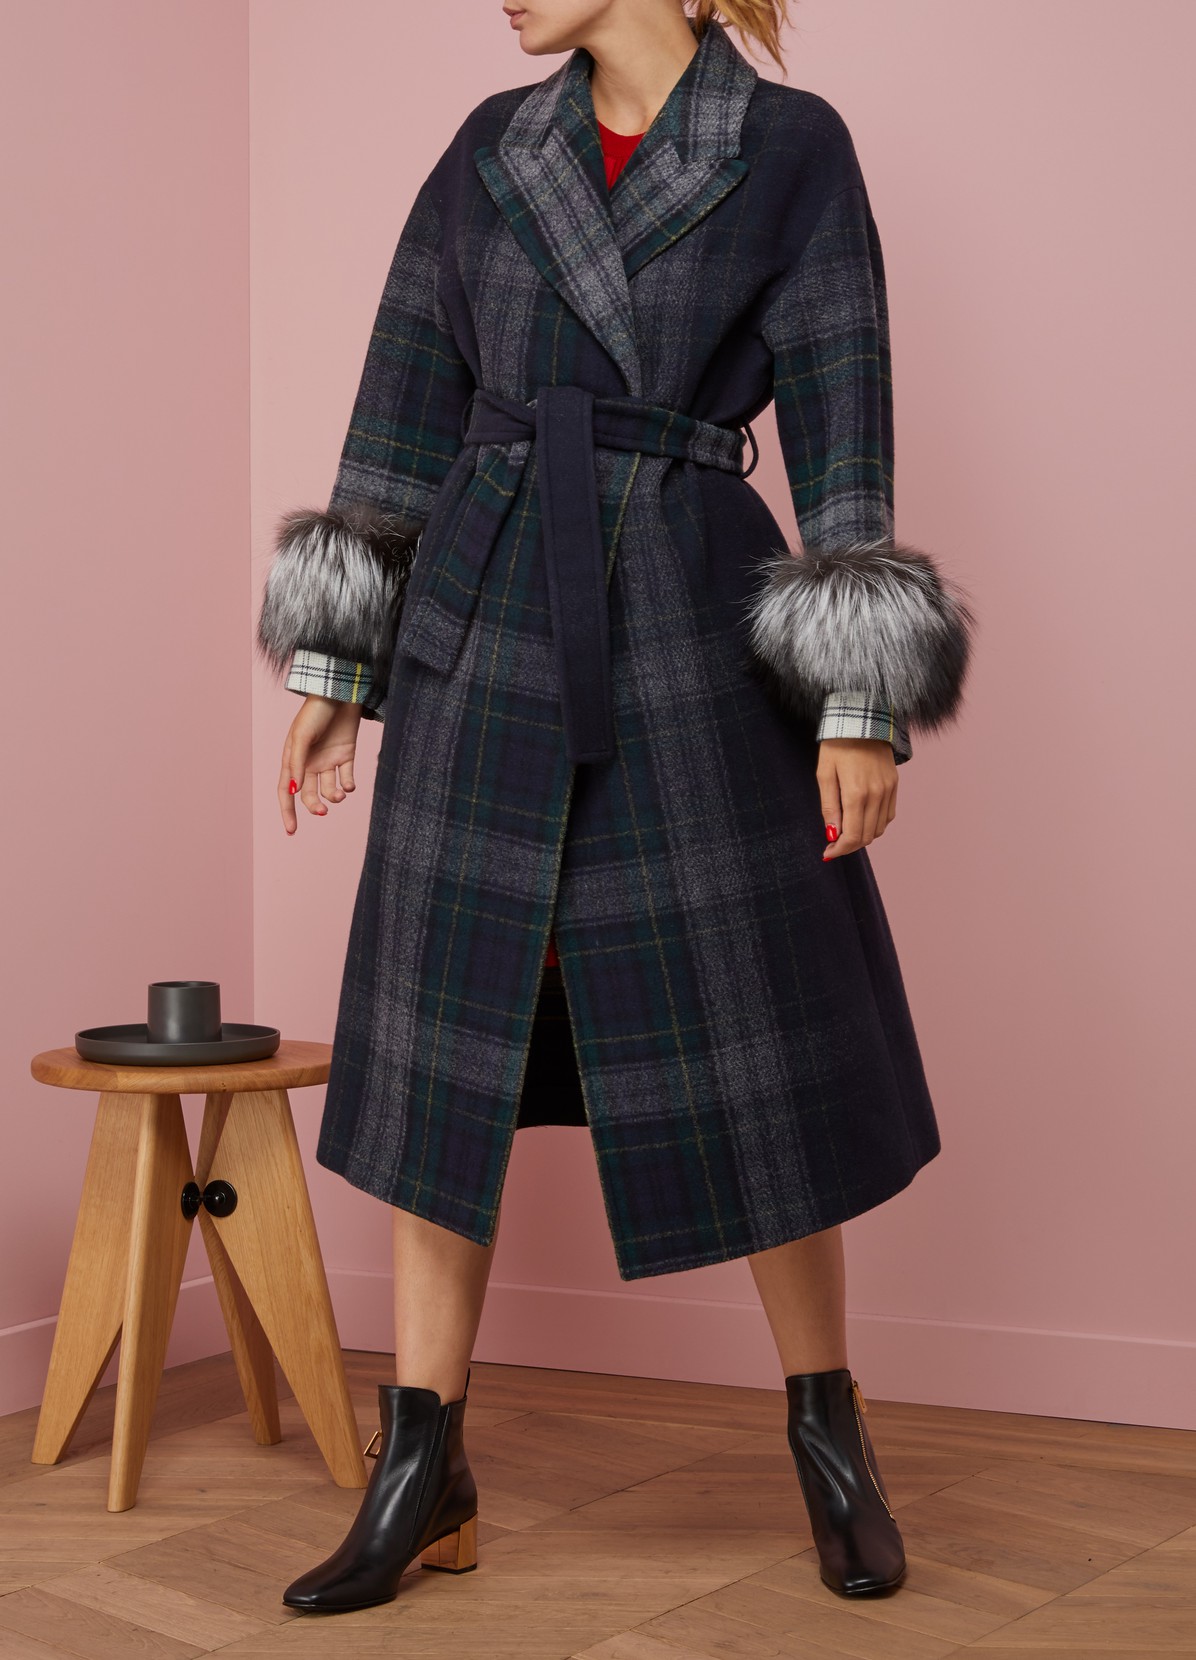 Price comparison for PRADA Fur-Trimmed Checked Wool Coat